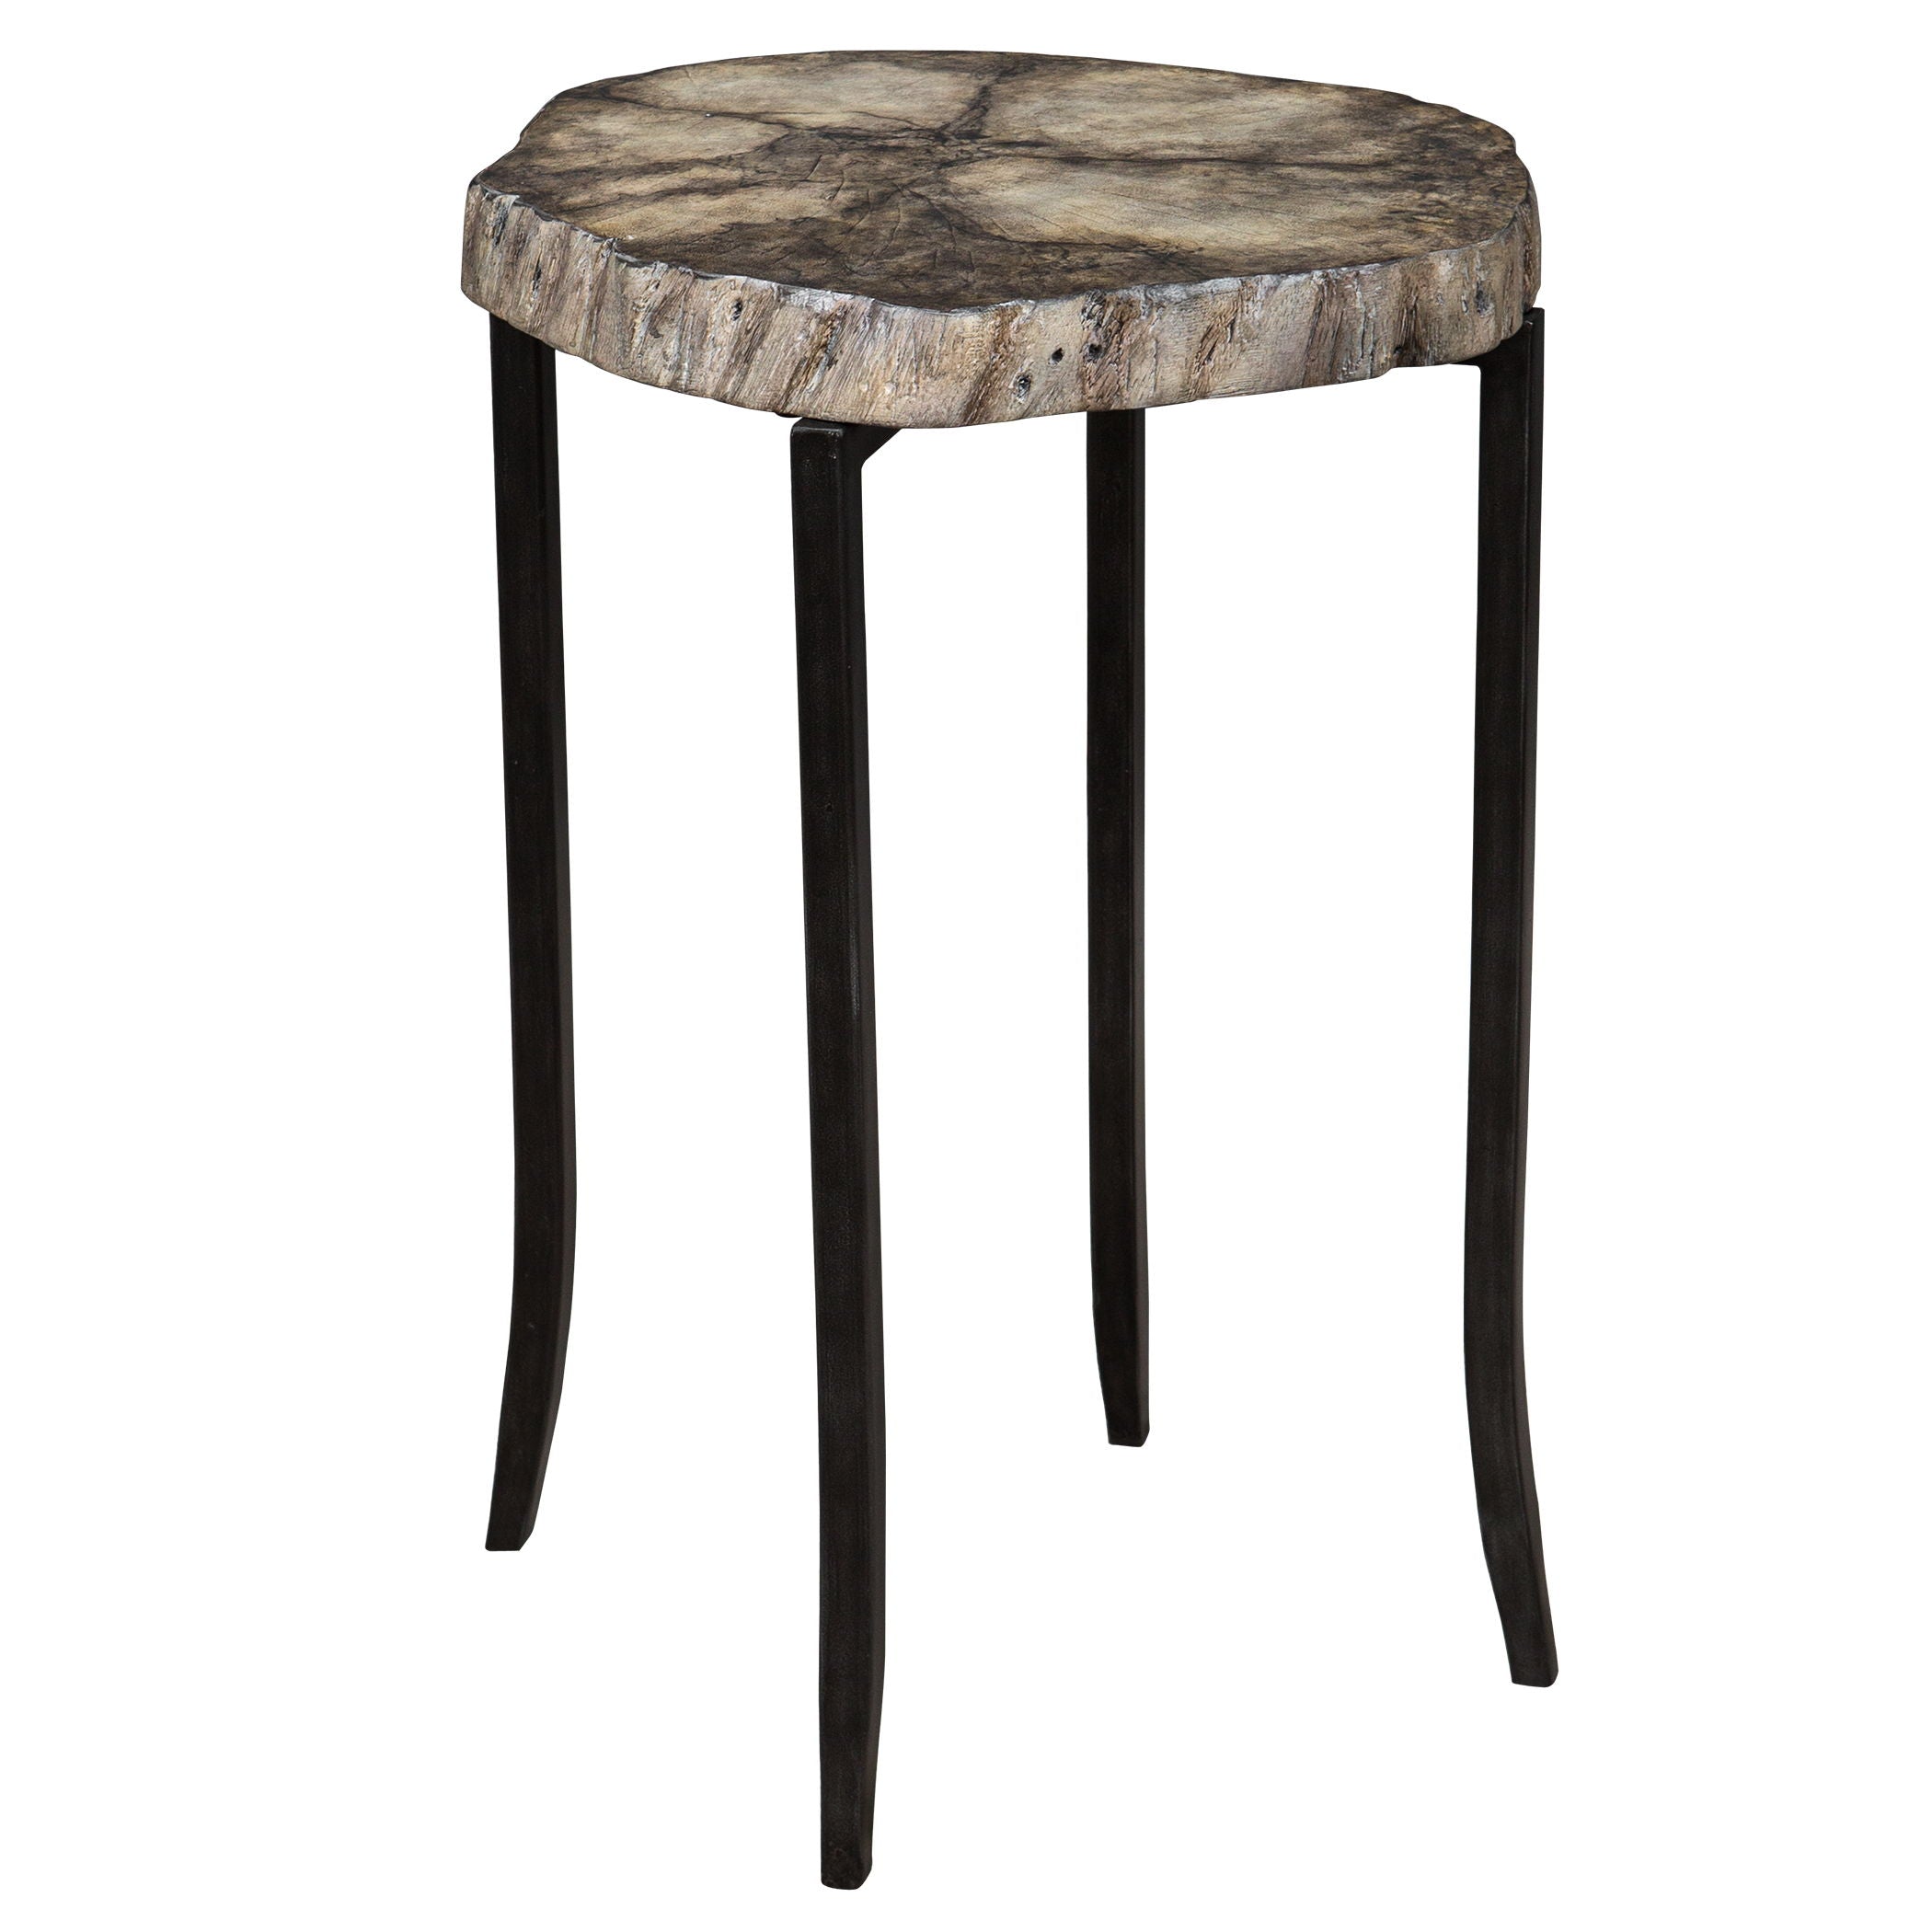 Stiles - Rustic Accent Table - Light Brown & Black